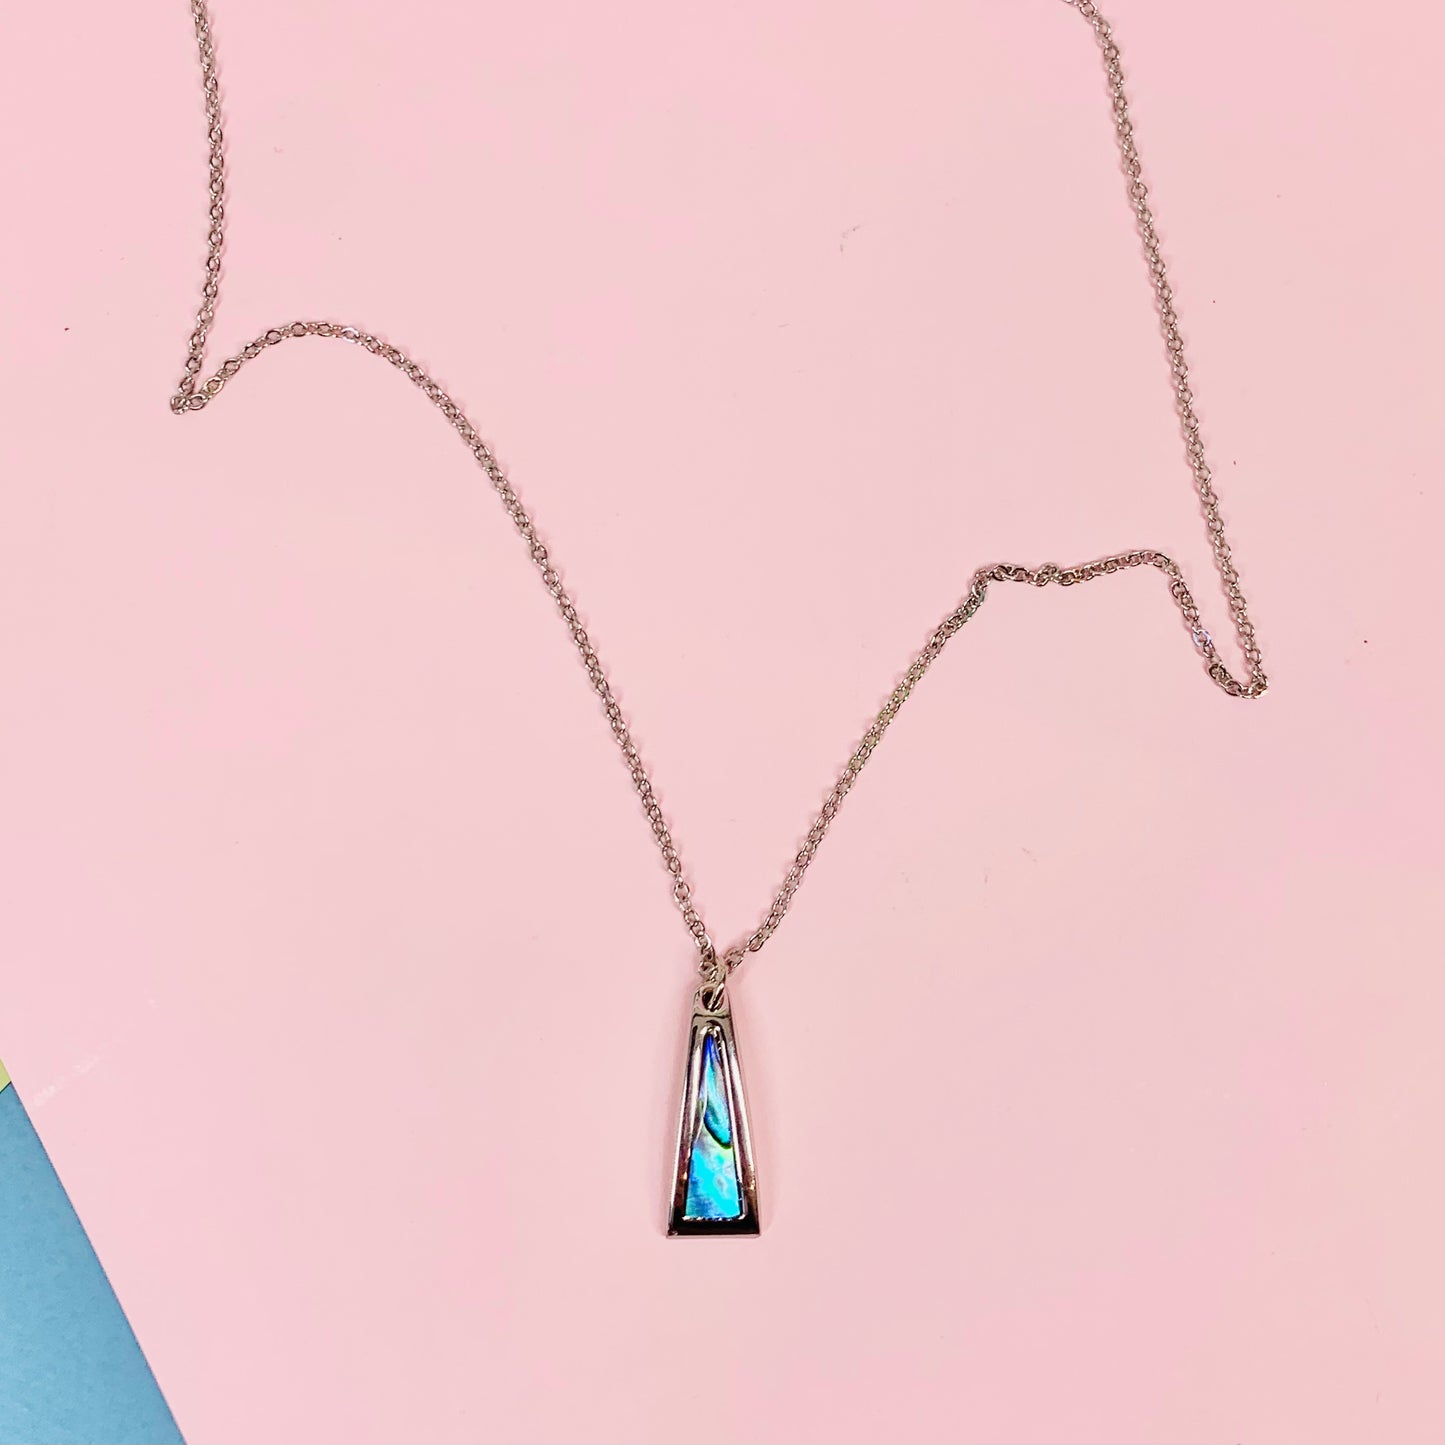 1980s silver plated chain with blue drop pendant